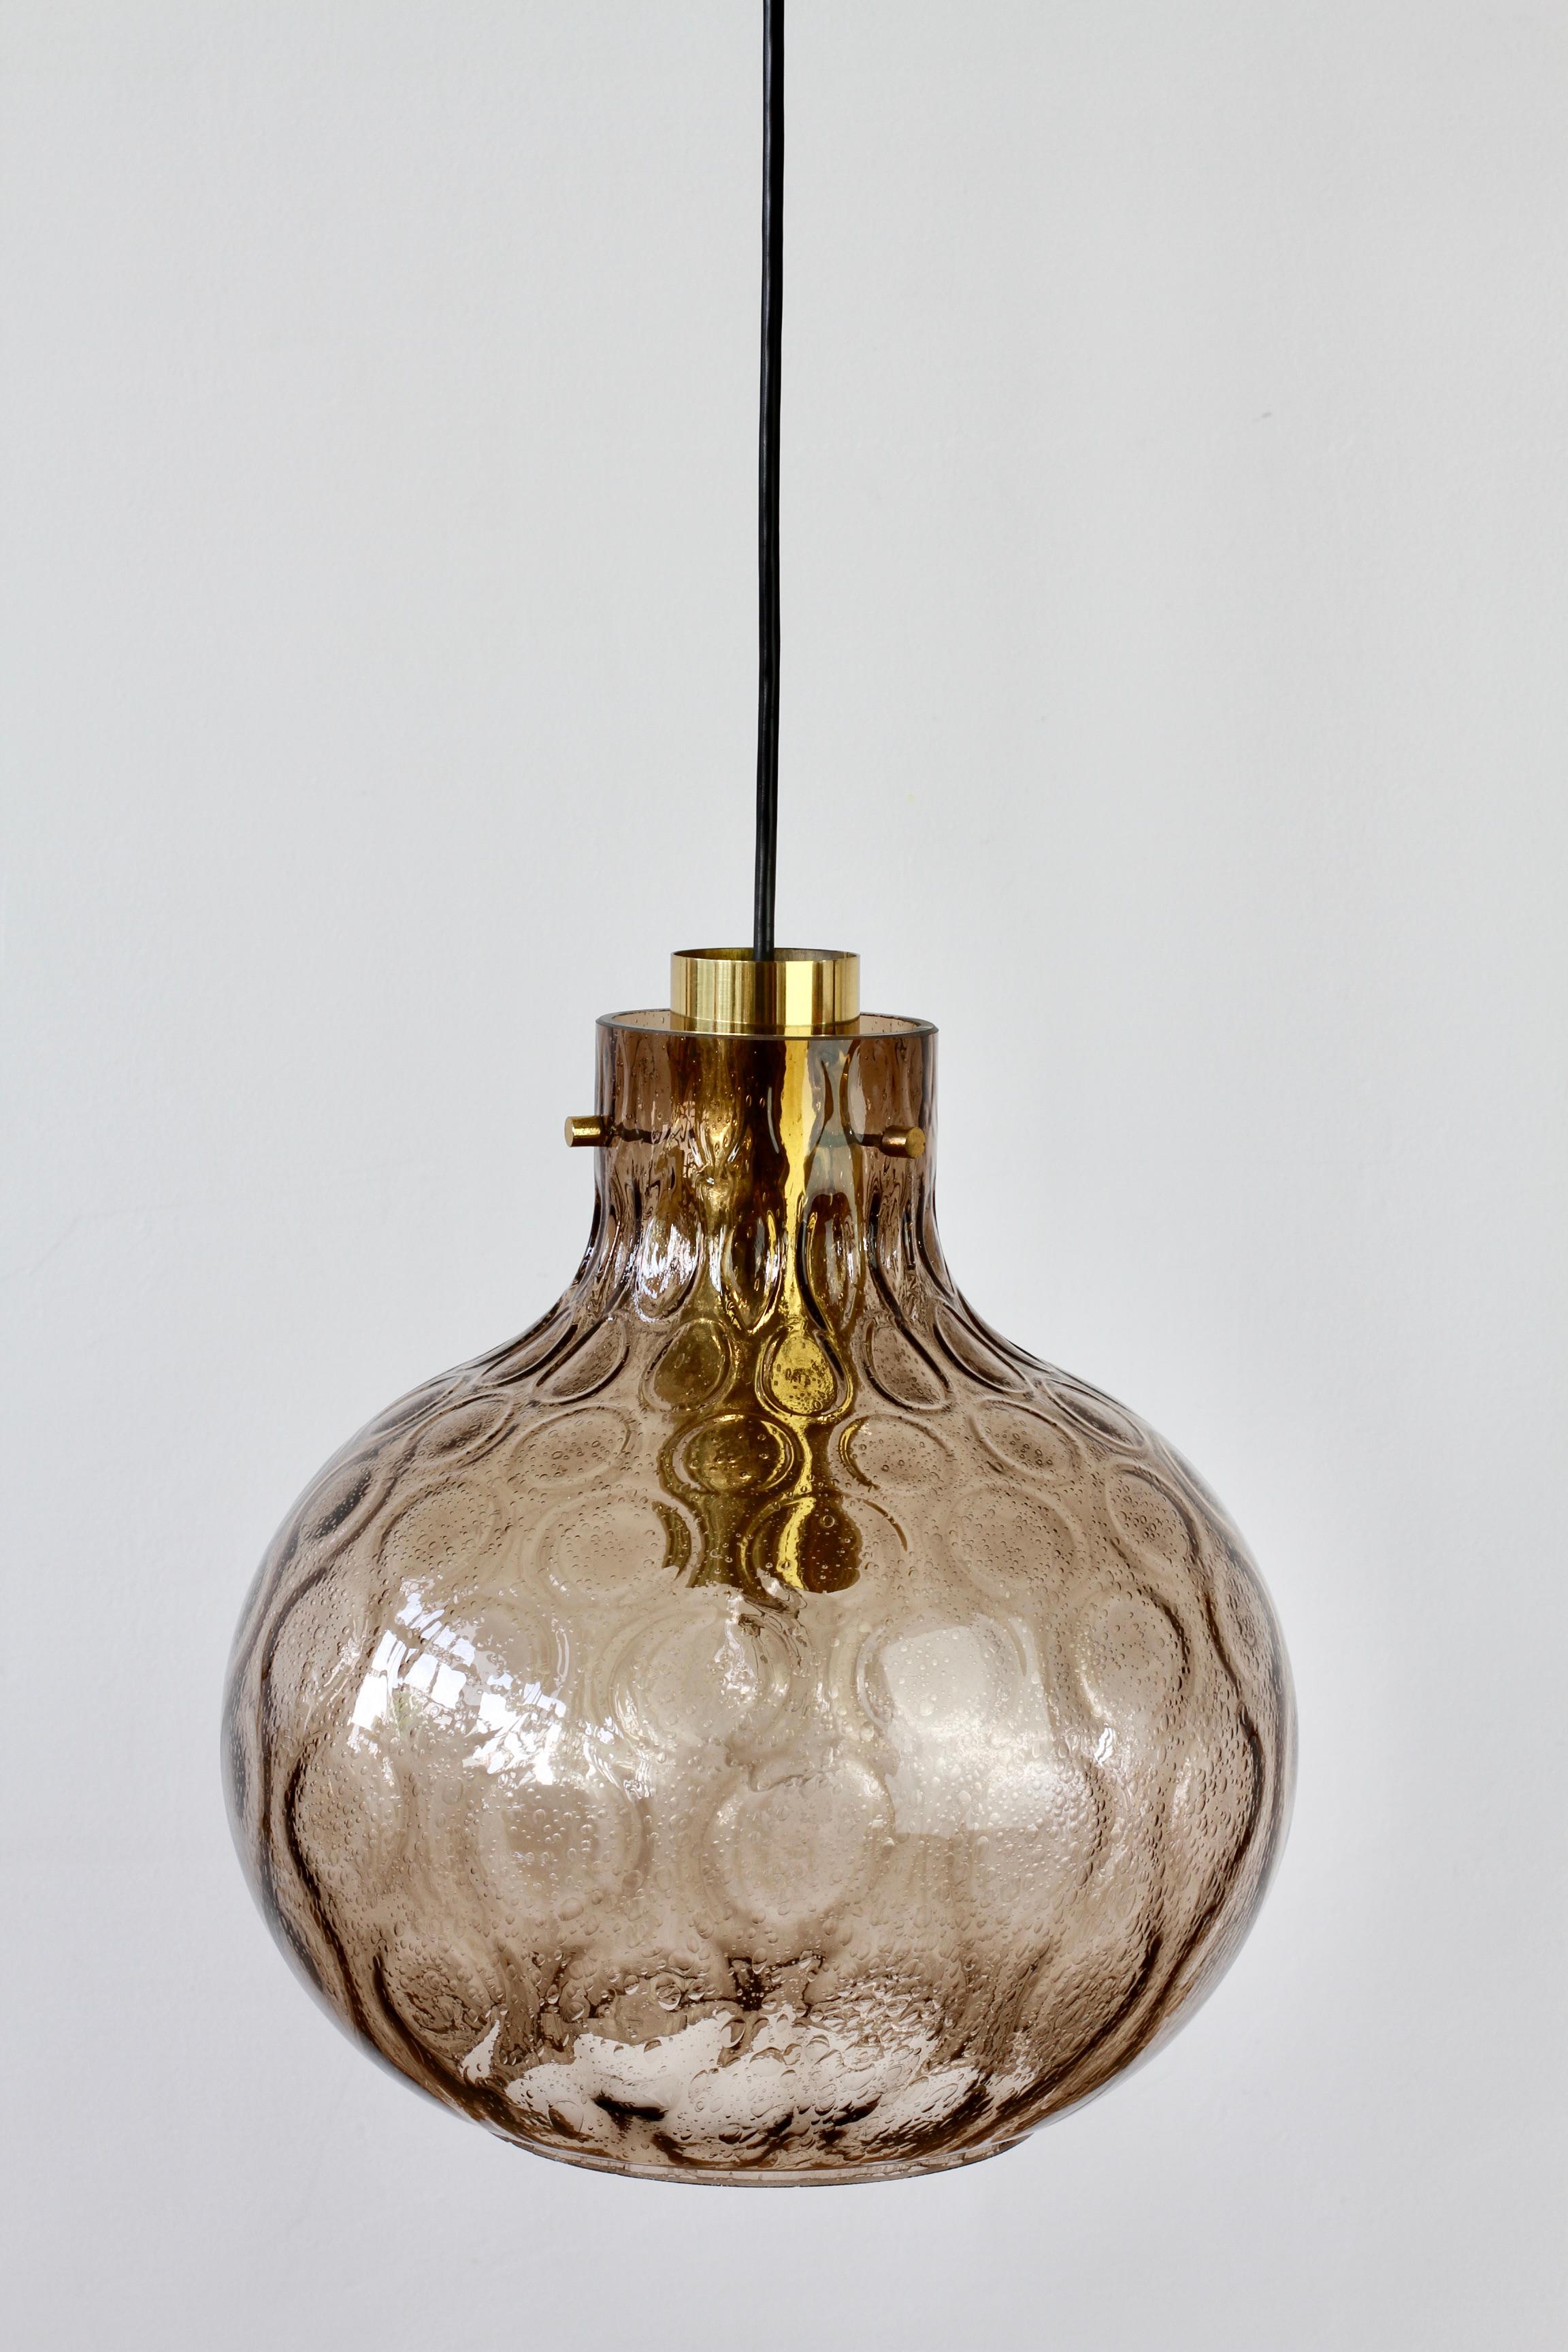 Molded 1 of 2 Large Vintage 1970s Bell Shaped Smoked Glass & Brass Globe Pendant Lights For Sale